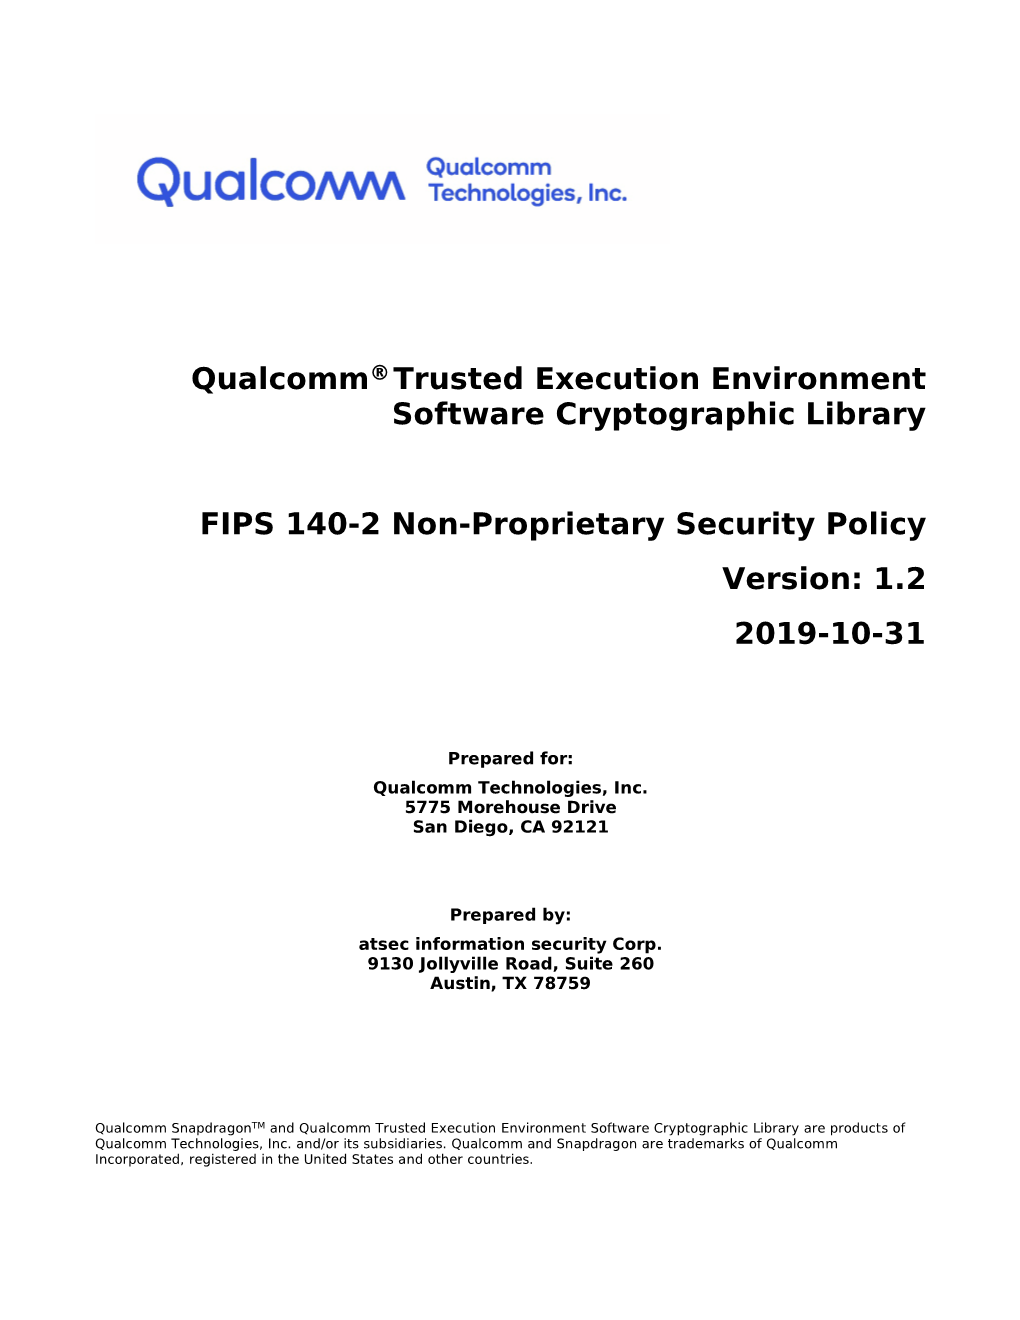 Qualcomm®Trusted Execution Environment Software